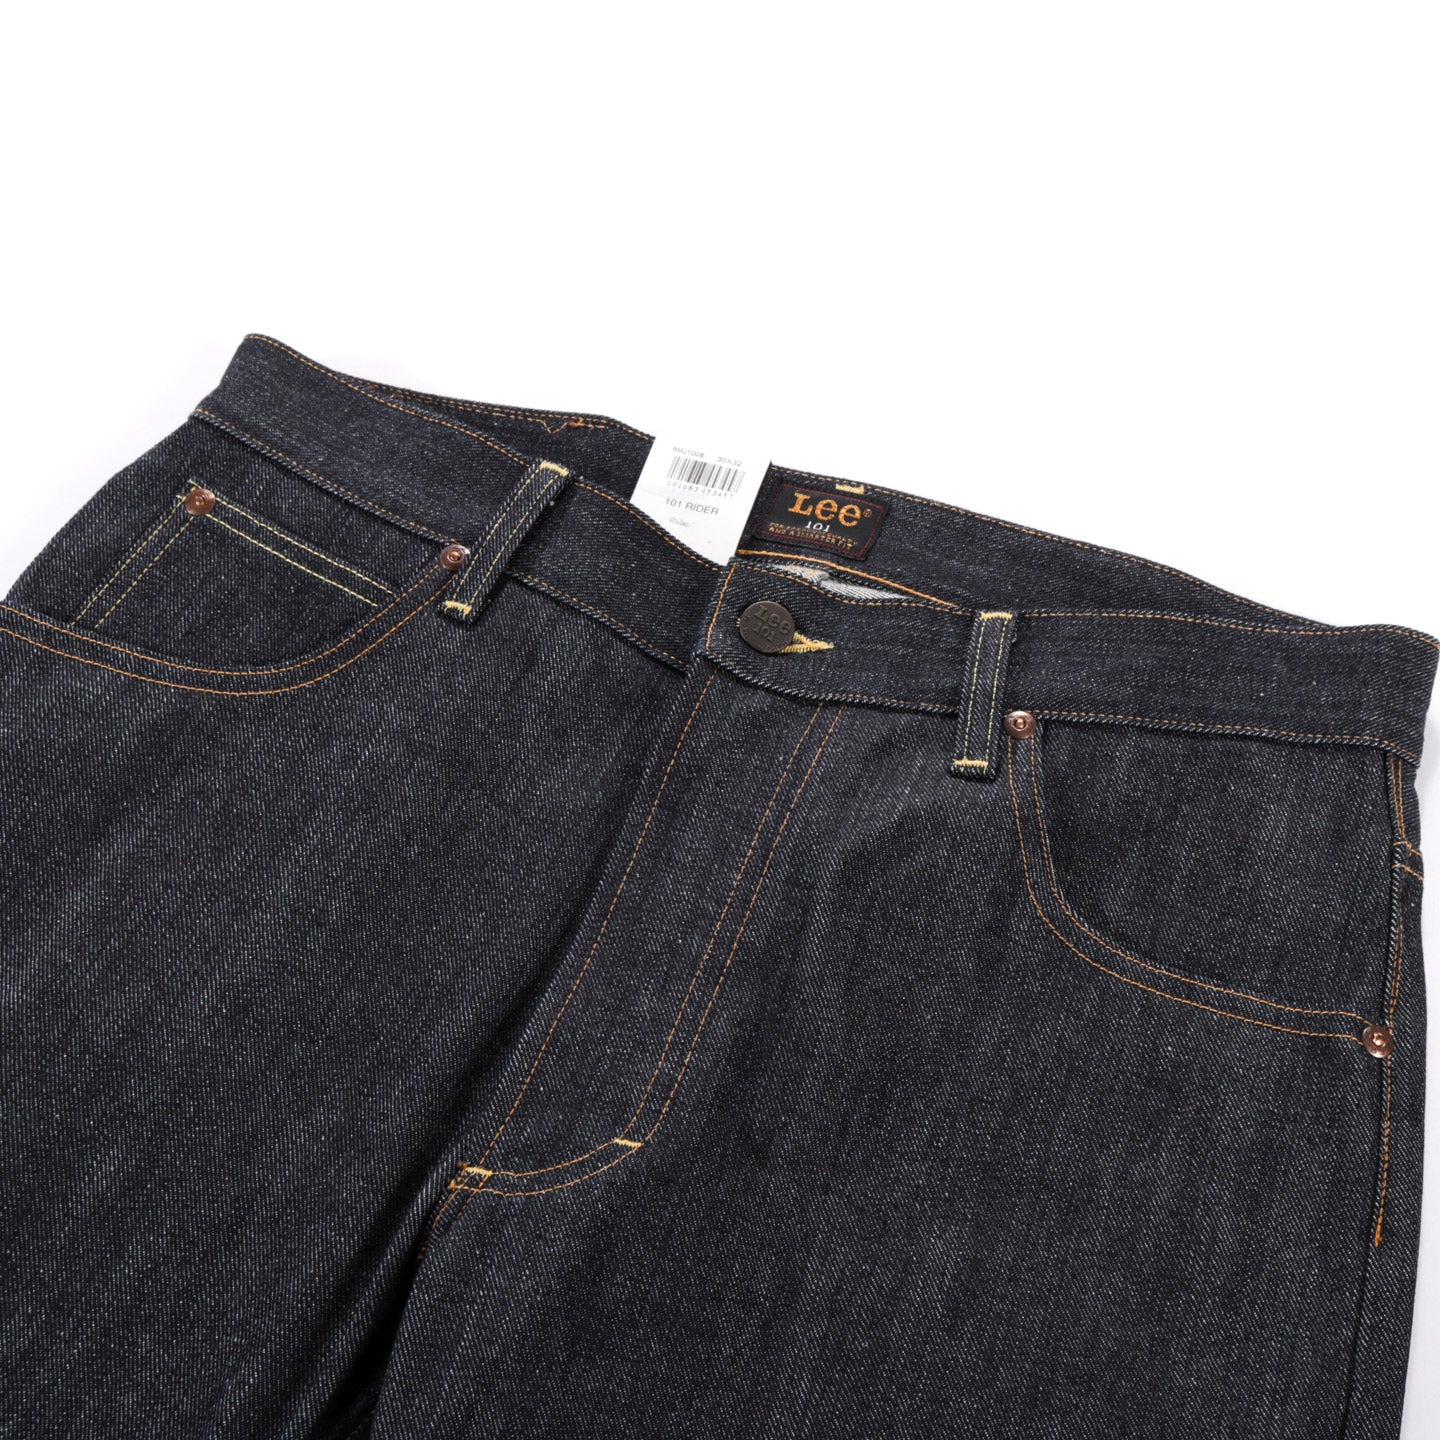 Lee 101 Rider Selvage Dry | Today Clothing